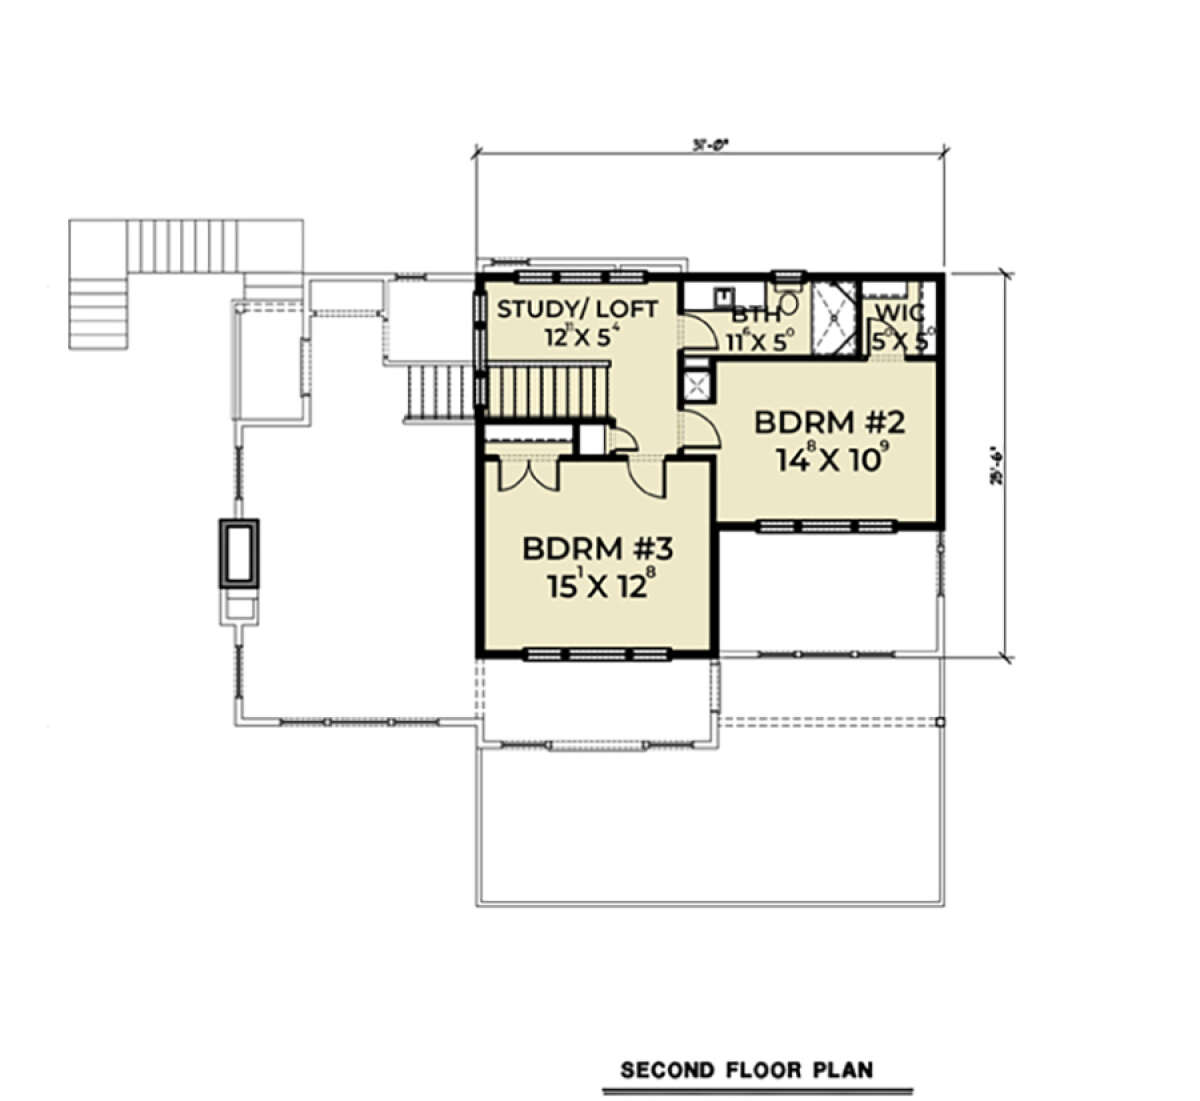 Second Floor for House Plan #2464-00023